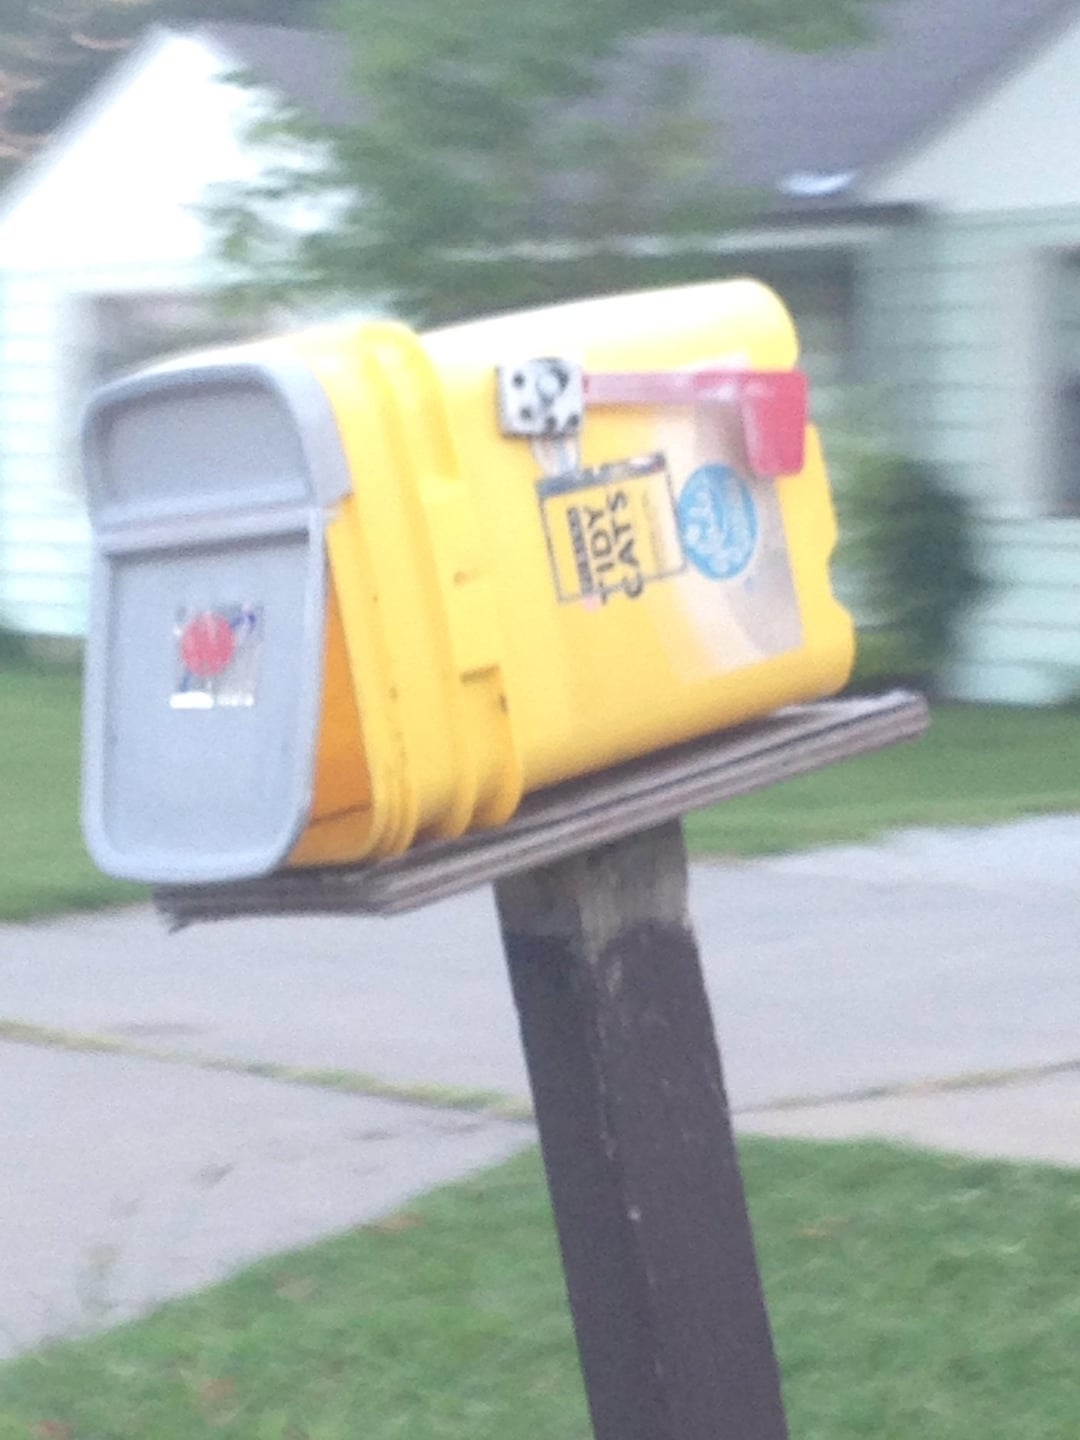 A plastic bin used as a mailbox